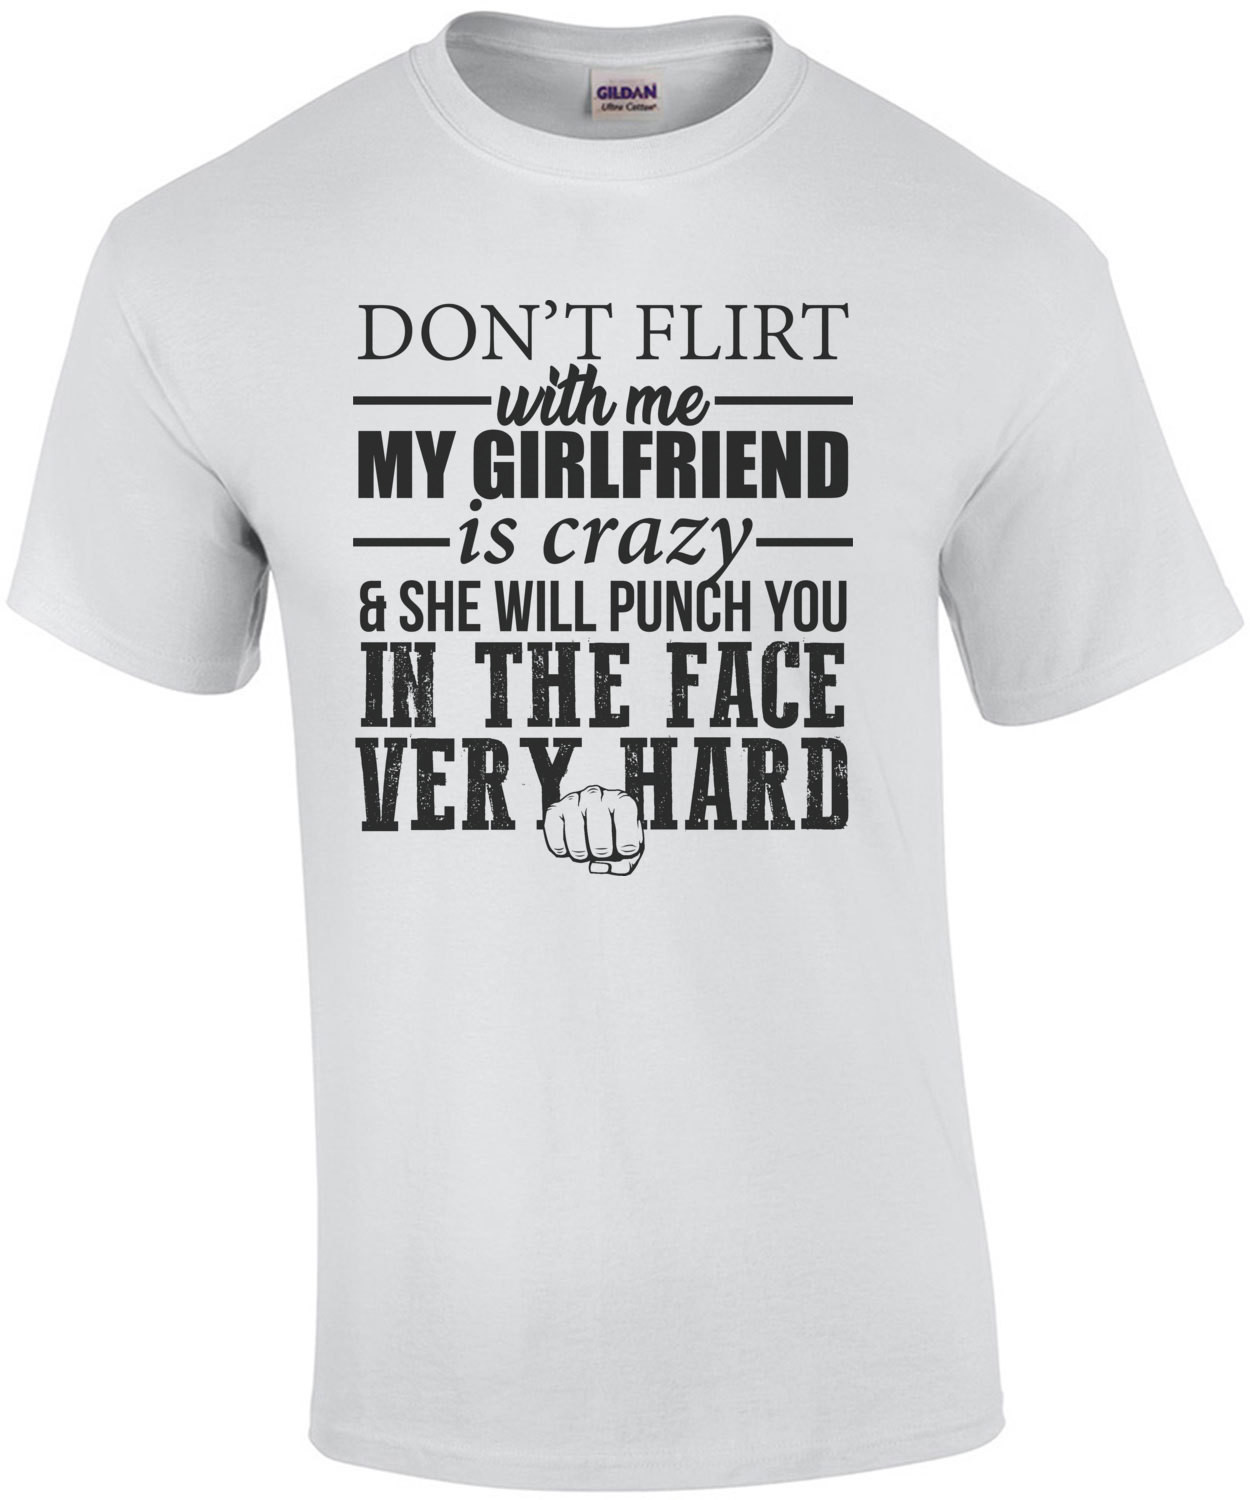 Don't flirt with me my girlfriend is crazy and she will punch you in the face very hard - funny t-shirt